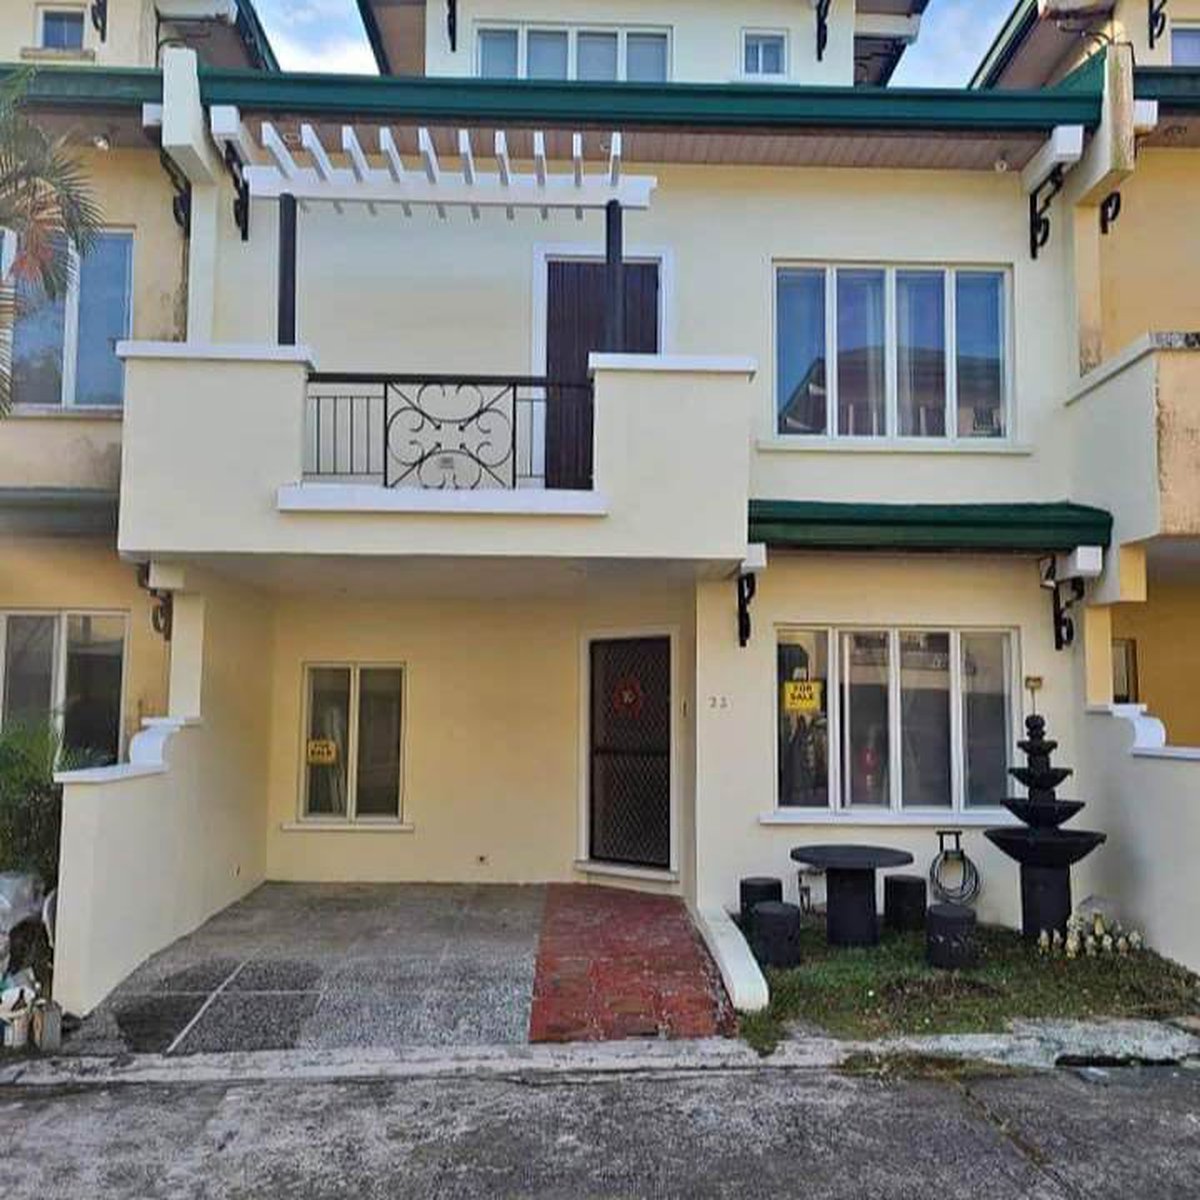 4 Bedroom Townhouse For Sale in Tagaytay City Cavite